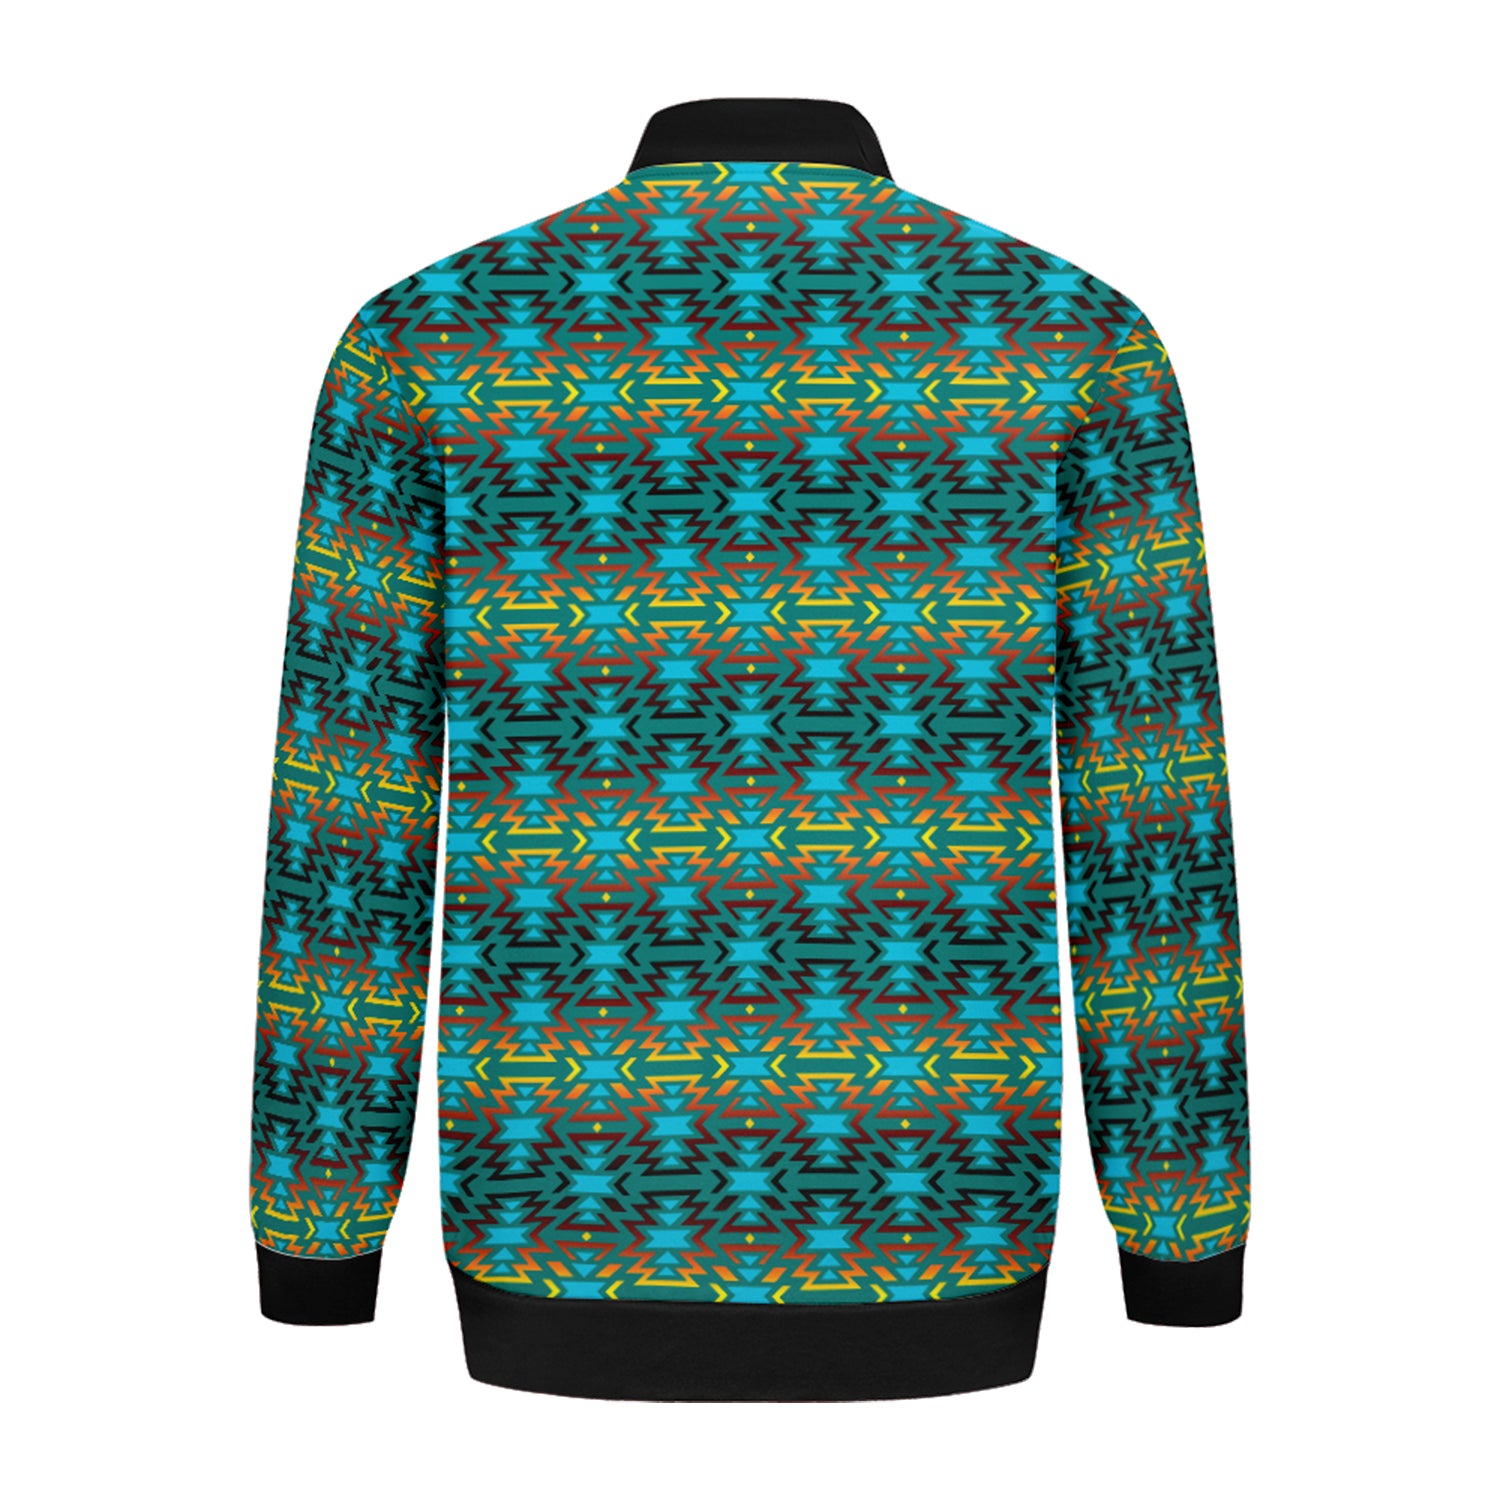 Fire Colors and Turquoise Teal Zippered Collared Lightweight Jacket